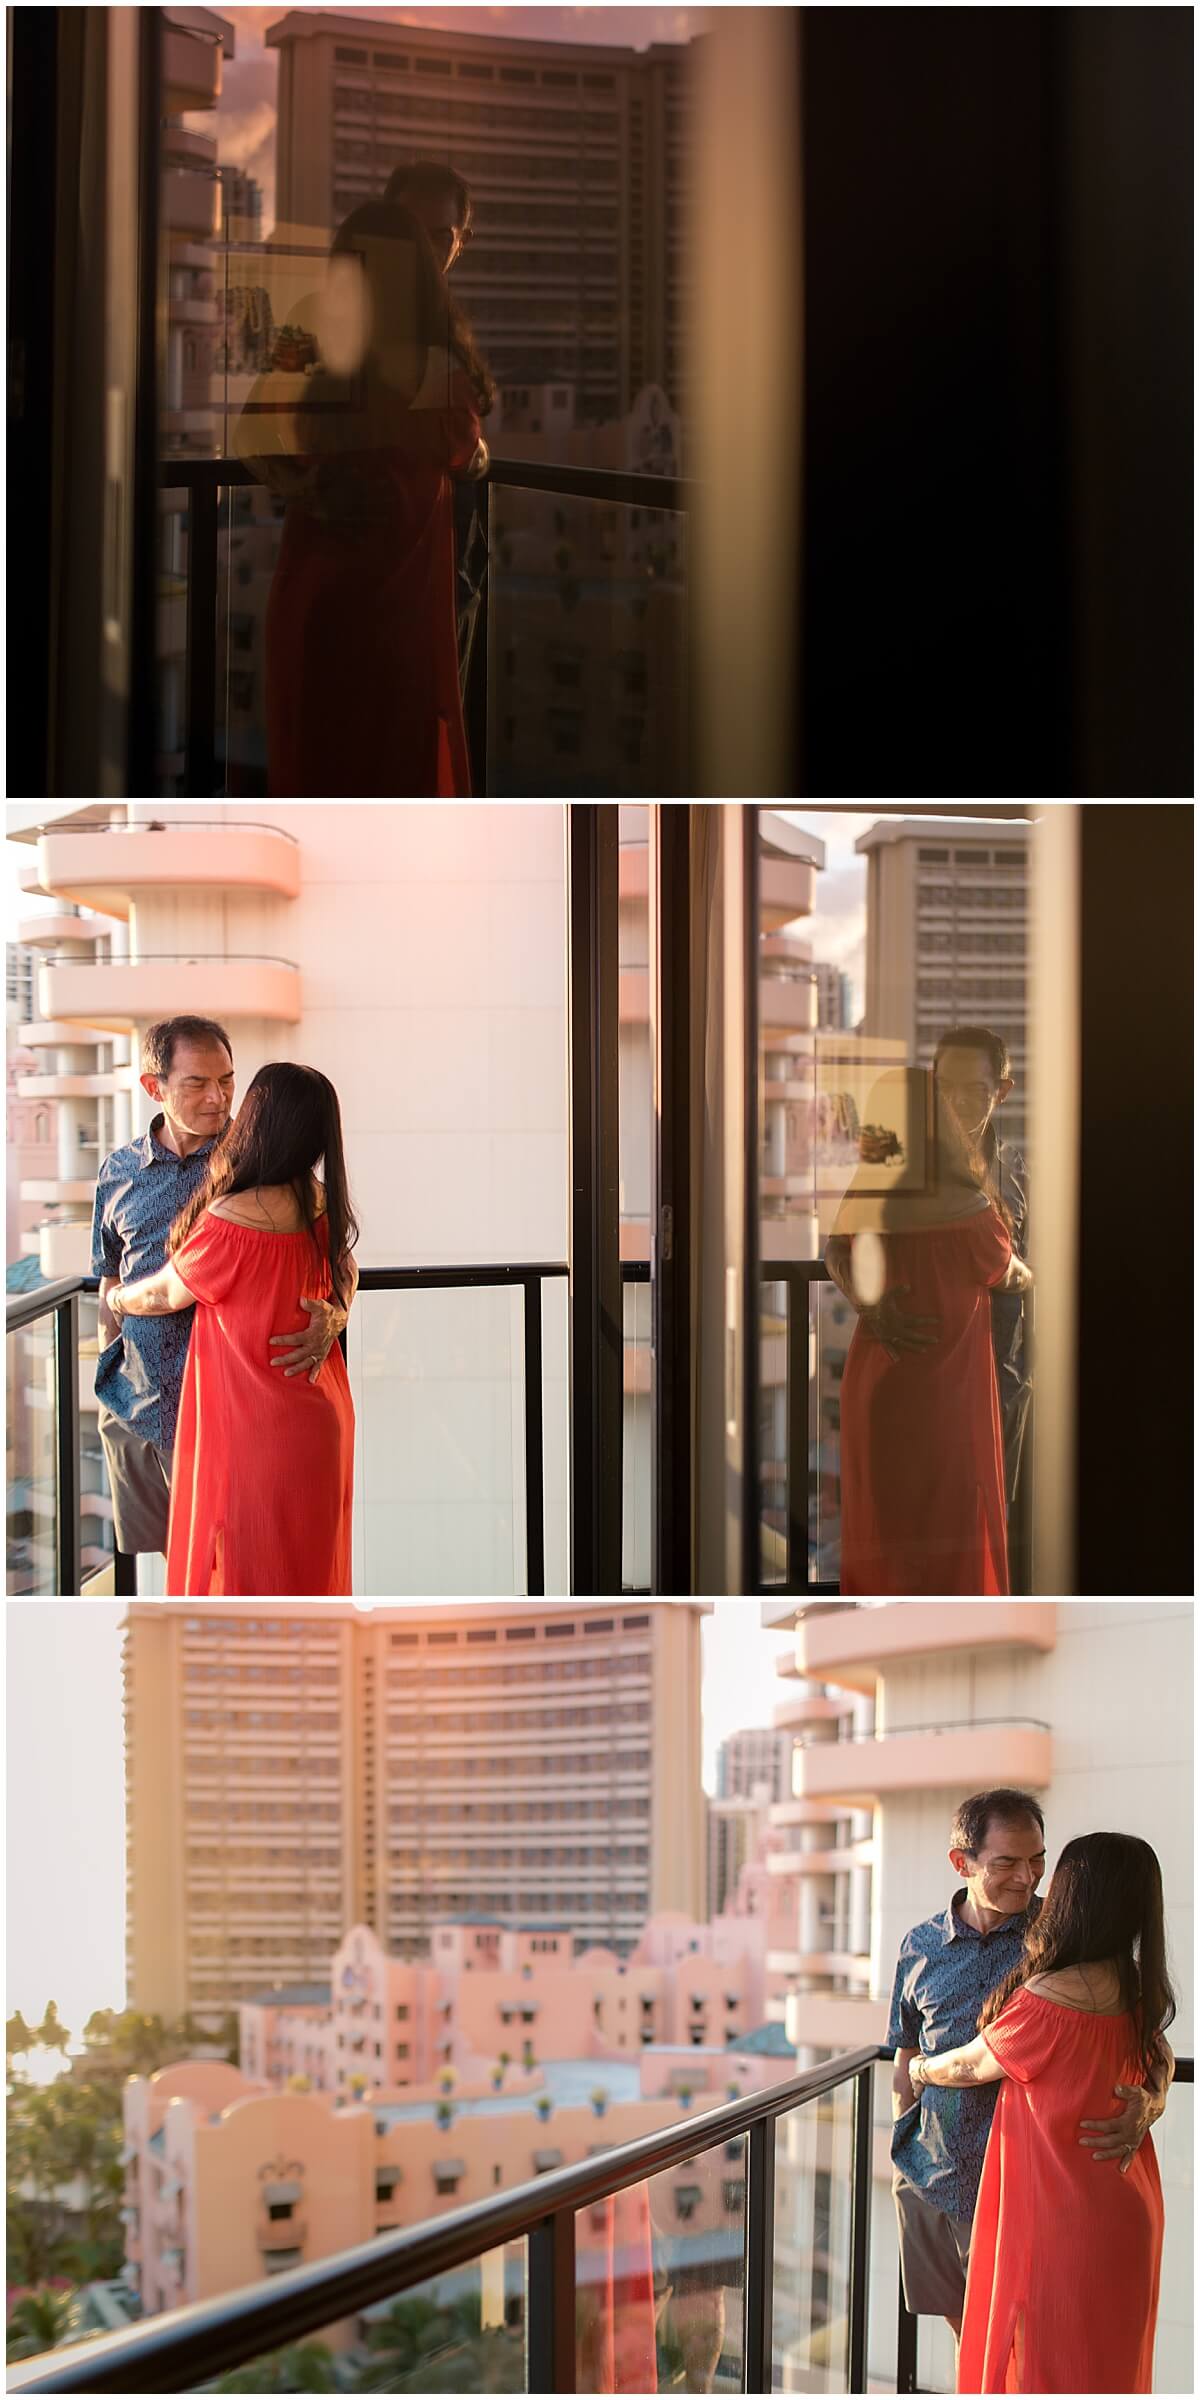 husband and wife embrace on balcony at sunset by Elle rose photo